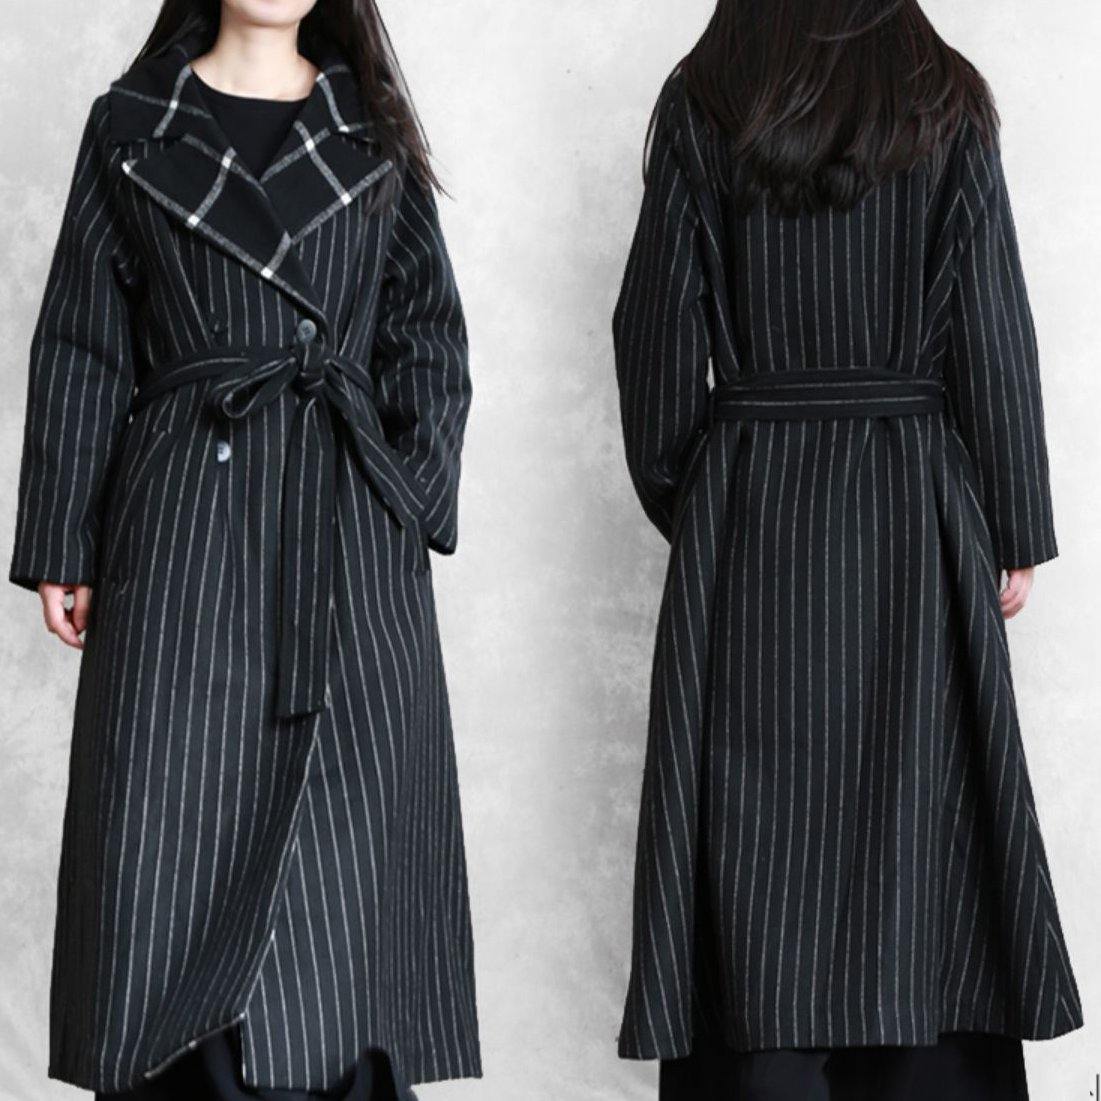 top quality oversized trench coat black striped Notched patchwork wool coat - Omychic